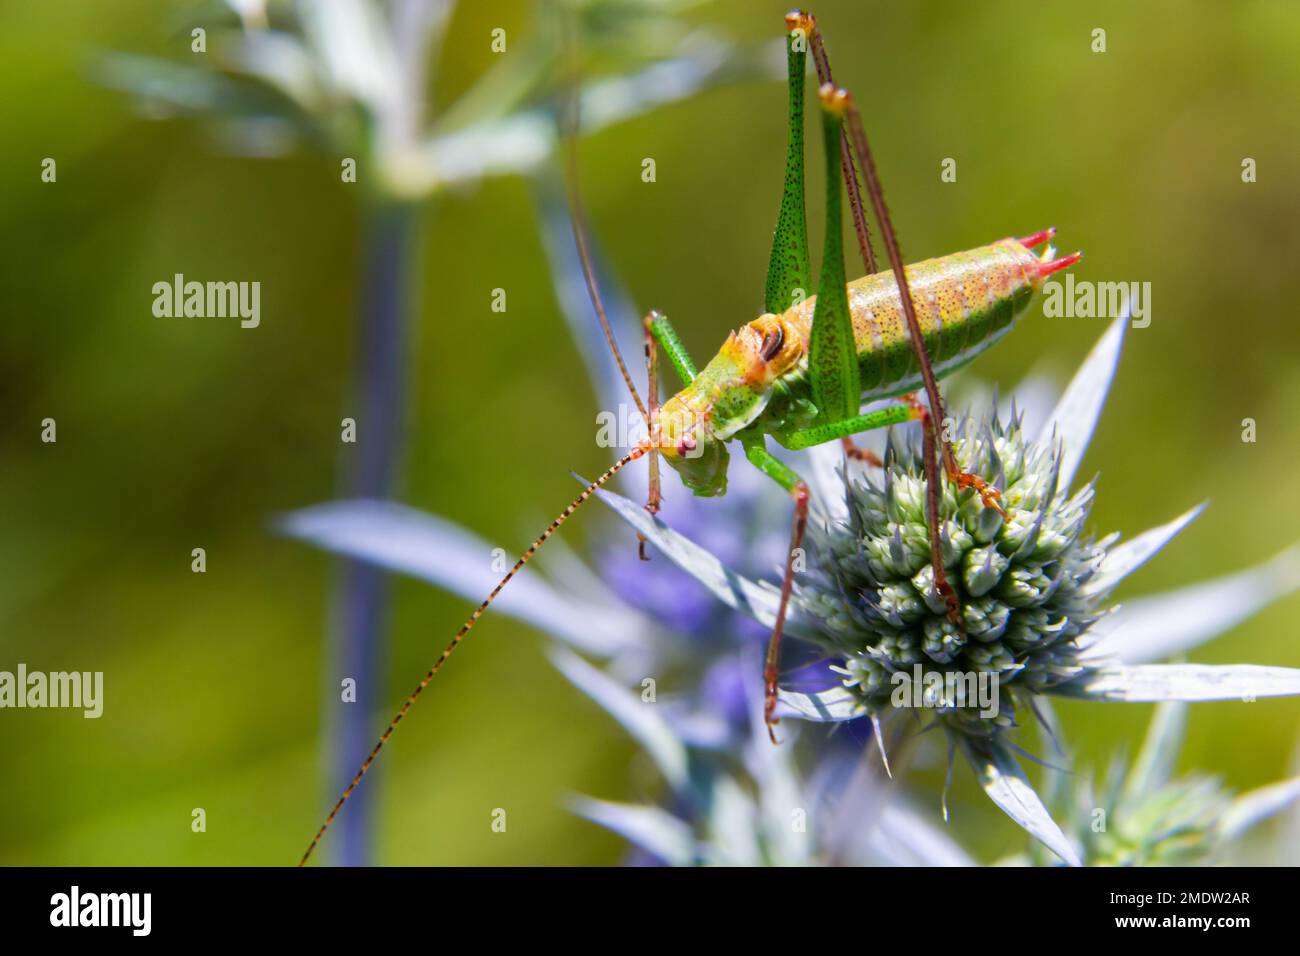 green grasshopper with black, green and white stripes on his back, sitting on a blue thistle amethyst eryngo flower - Eryngium amethystinum. close up Stock Photo